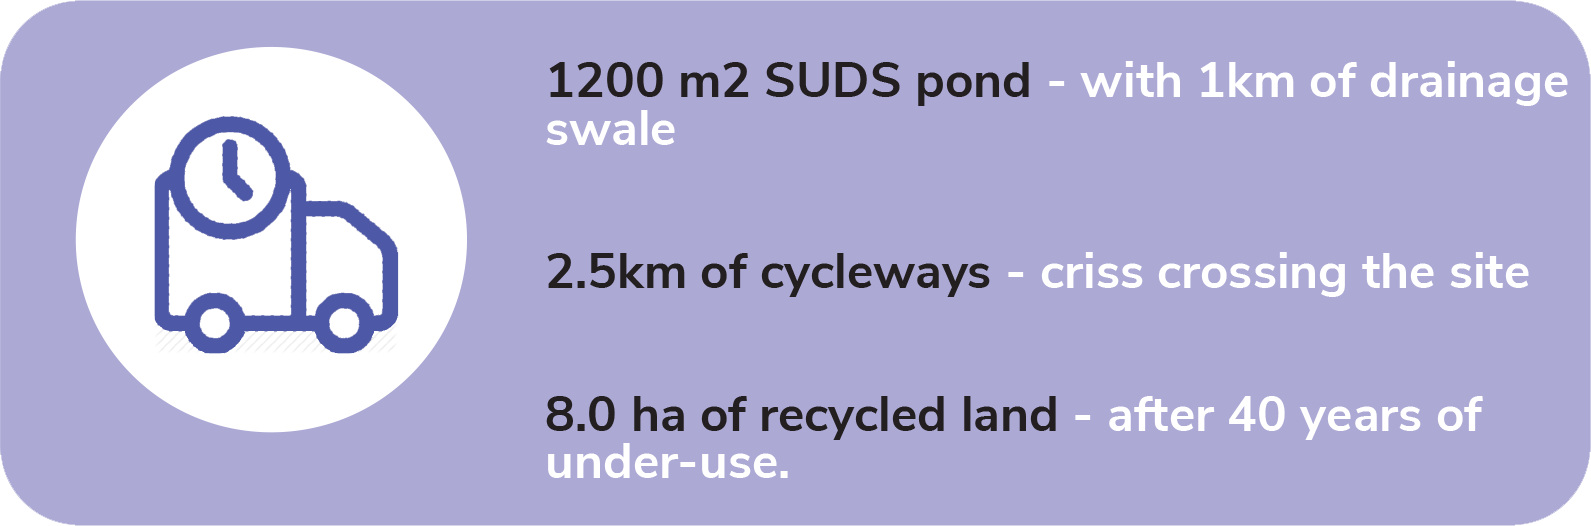 1200 sq m SUDS pond with 1km of drainage swale; 2.5km of cycleways cris-crossing the site; 8 hectare of recycled land after 40 years of under-use